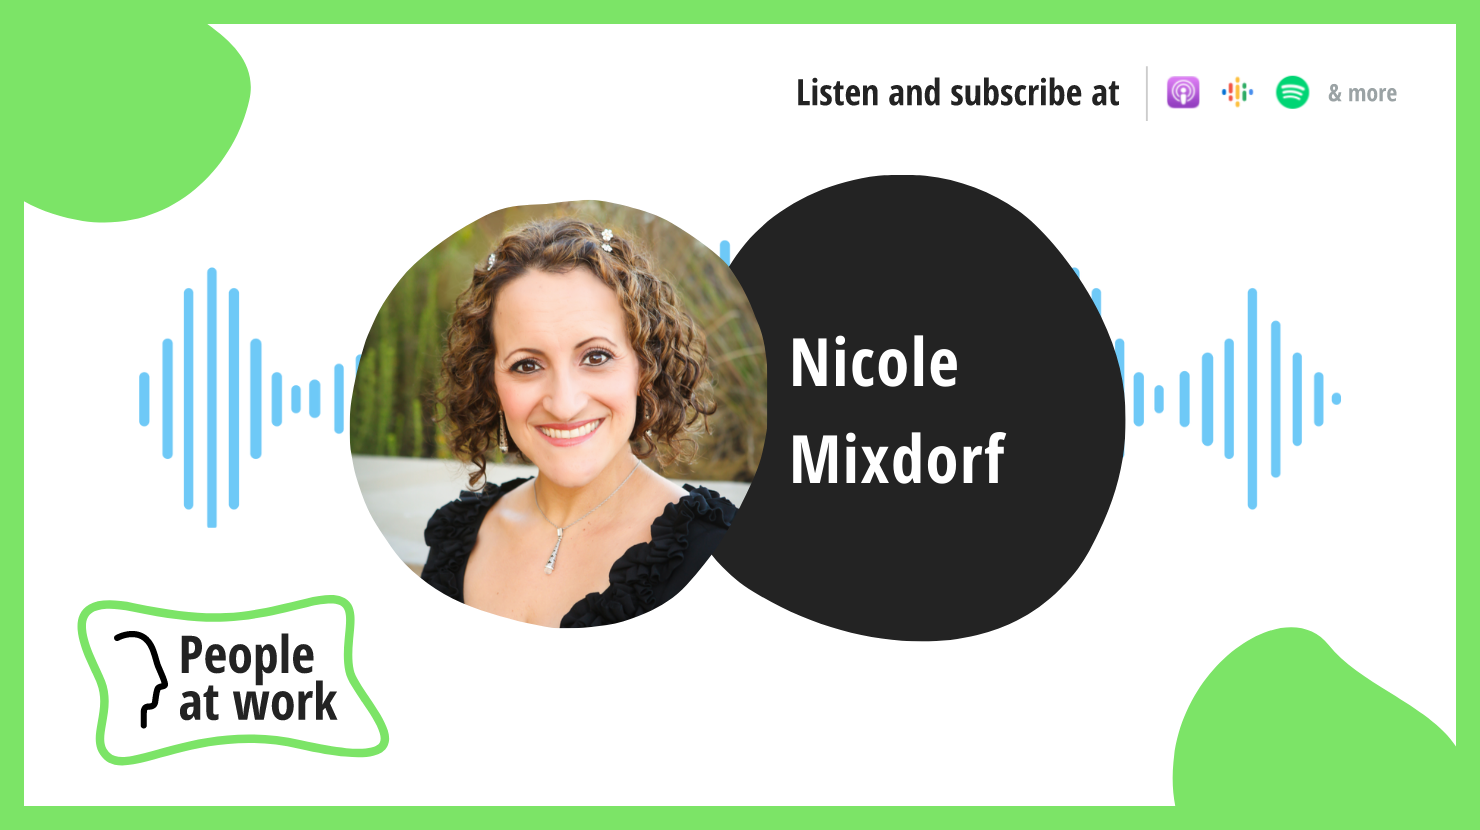 Manage stress with a deep breath says Nicole Mixdorf